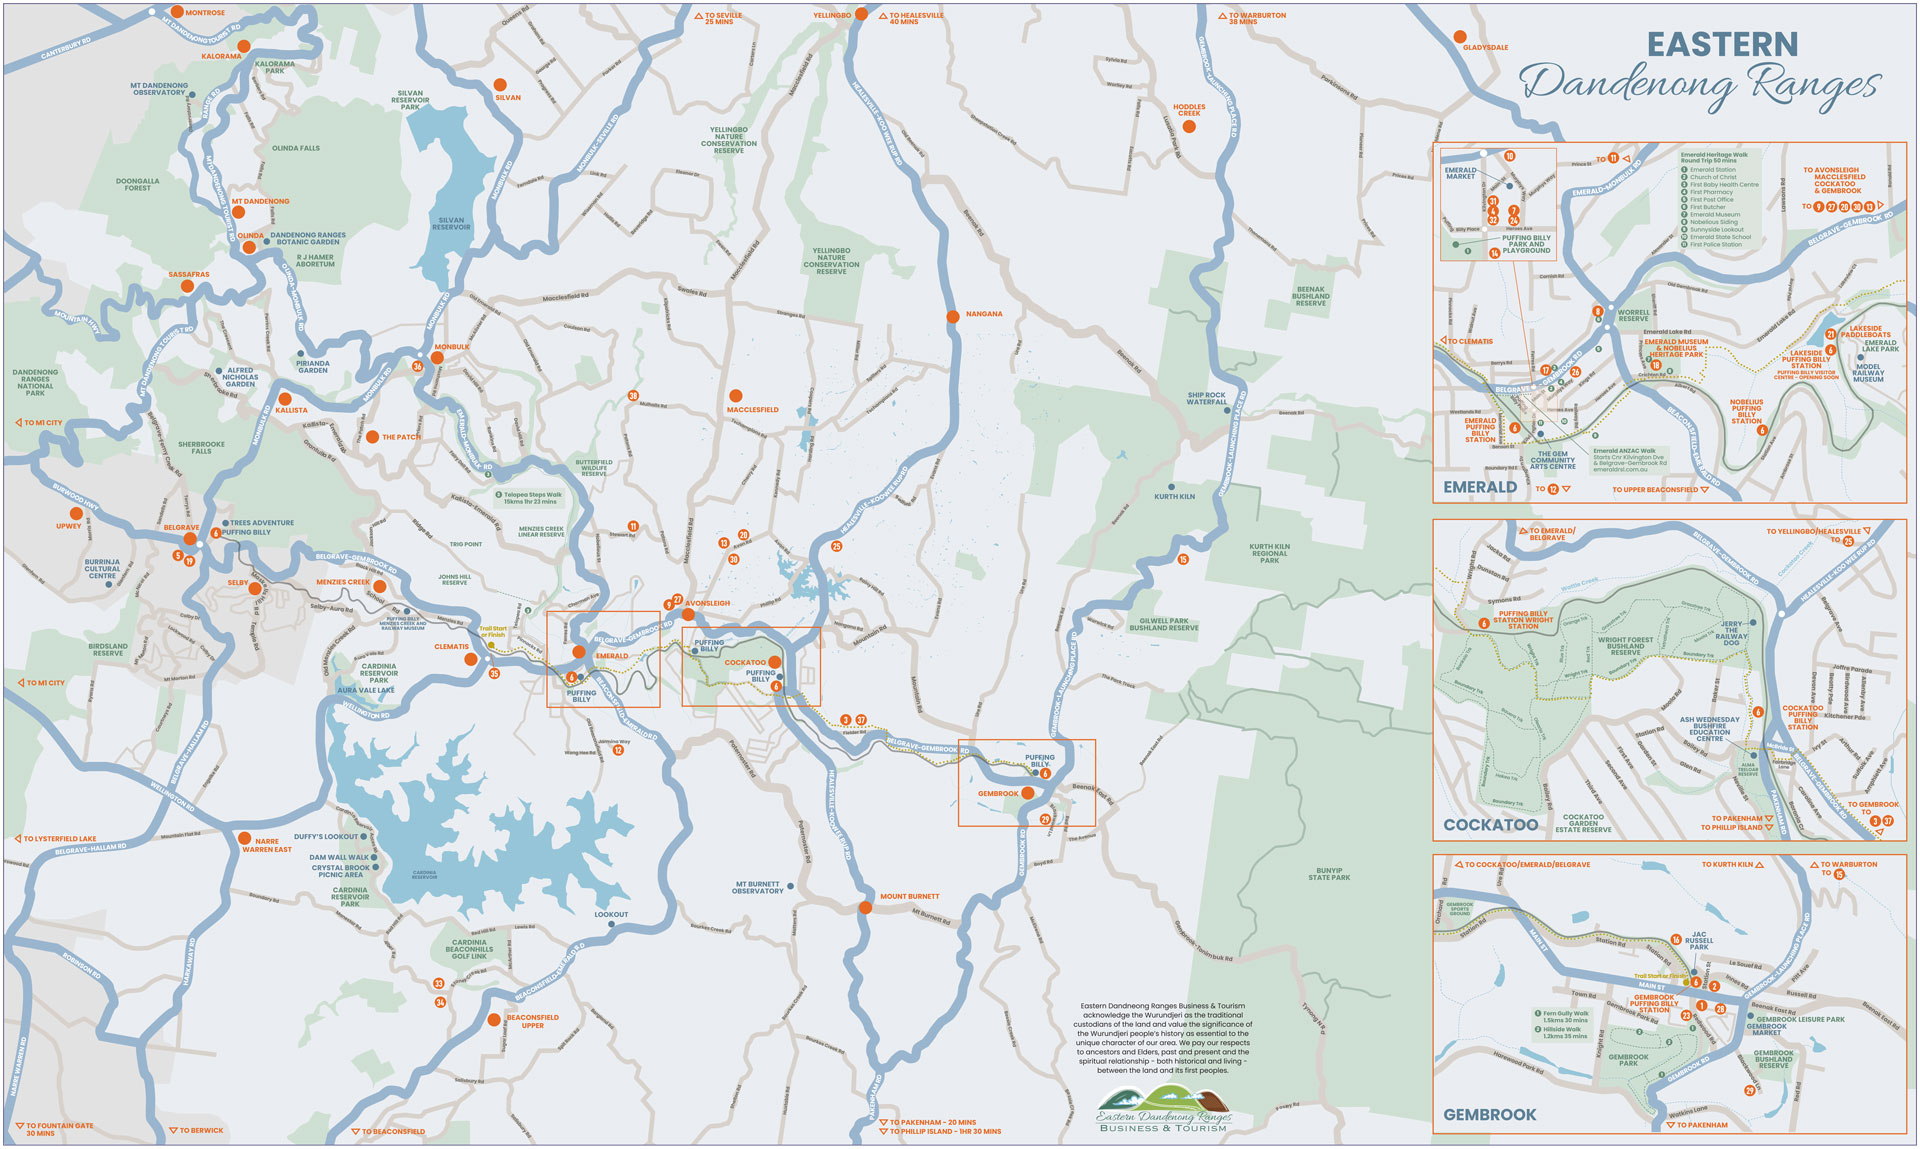 Map of the Eastern Dandenong Ranges